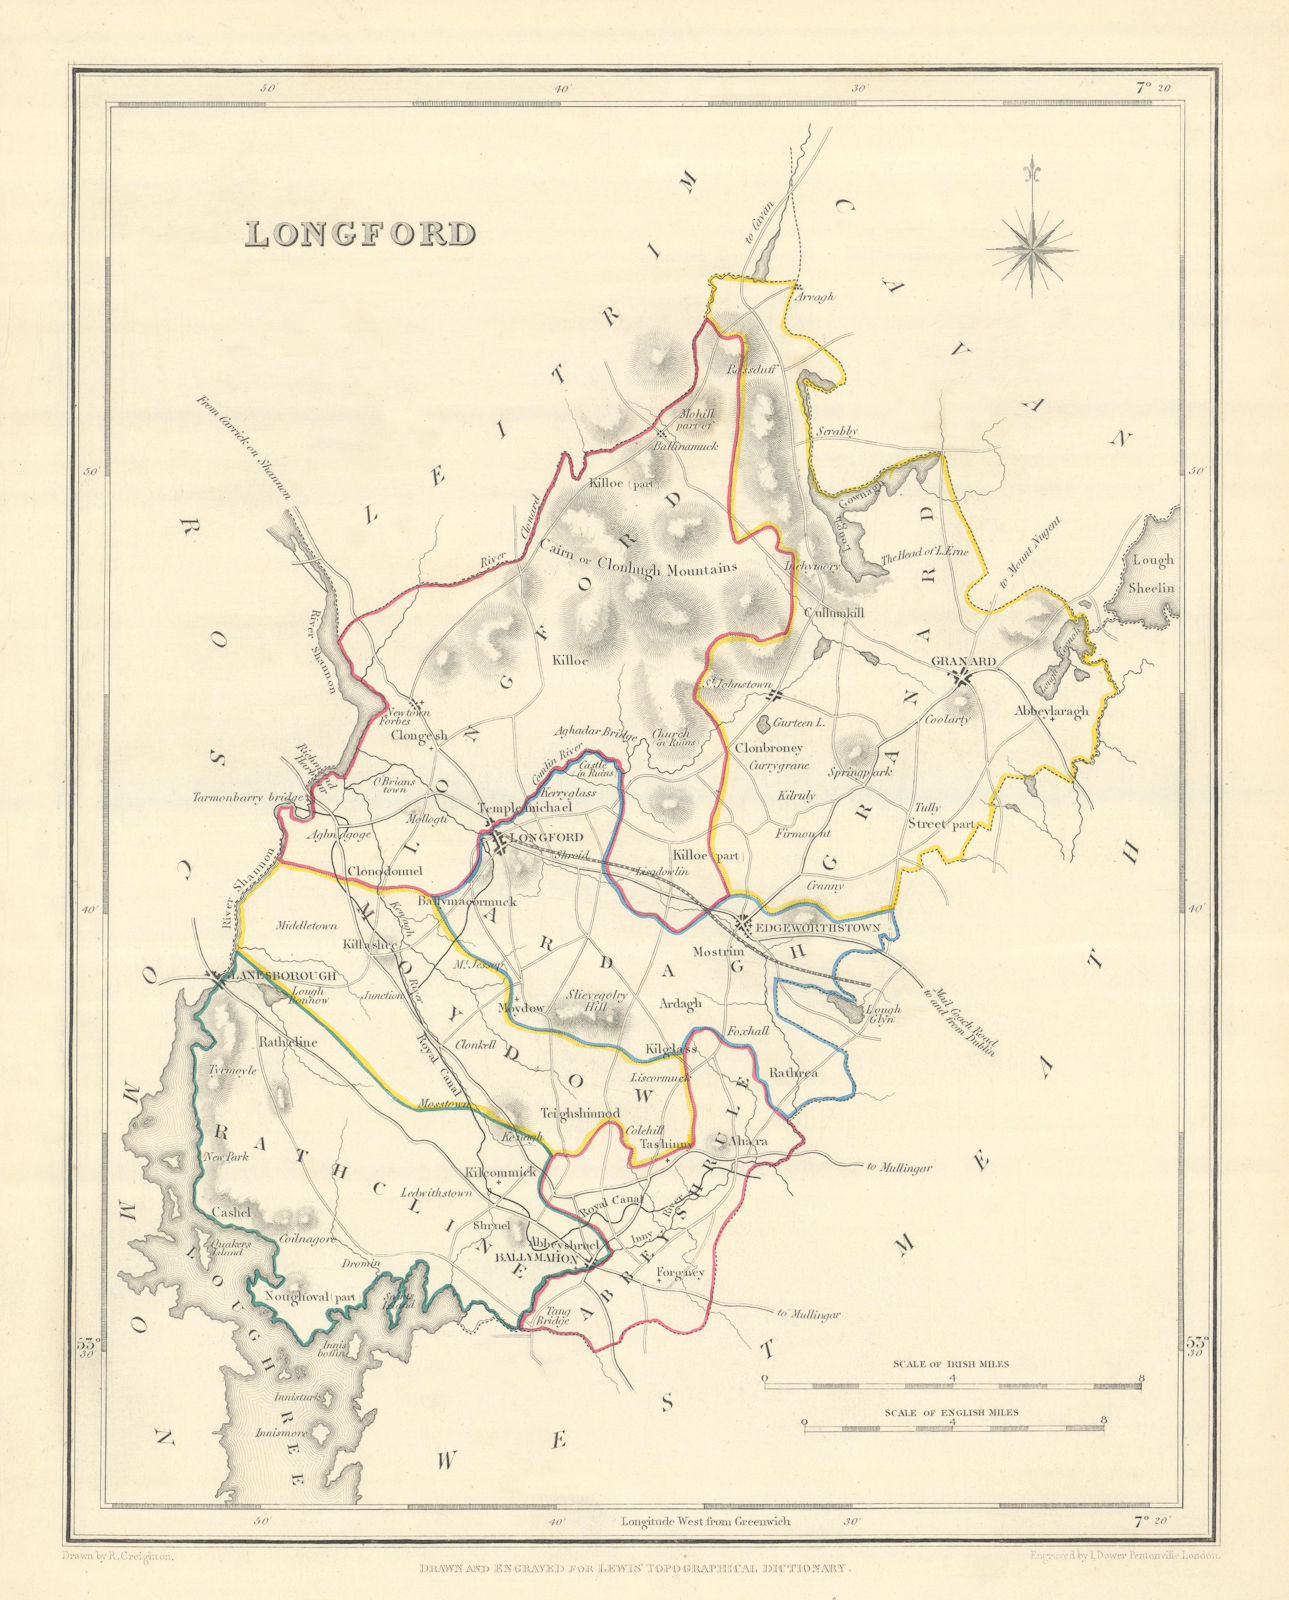 COUNTY LONGFORD antique map for LEWIS by CREIGHTON & DOWER. Ireland 1850